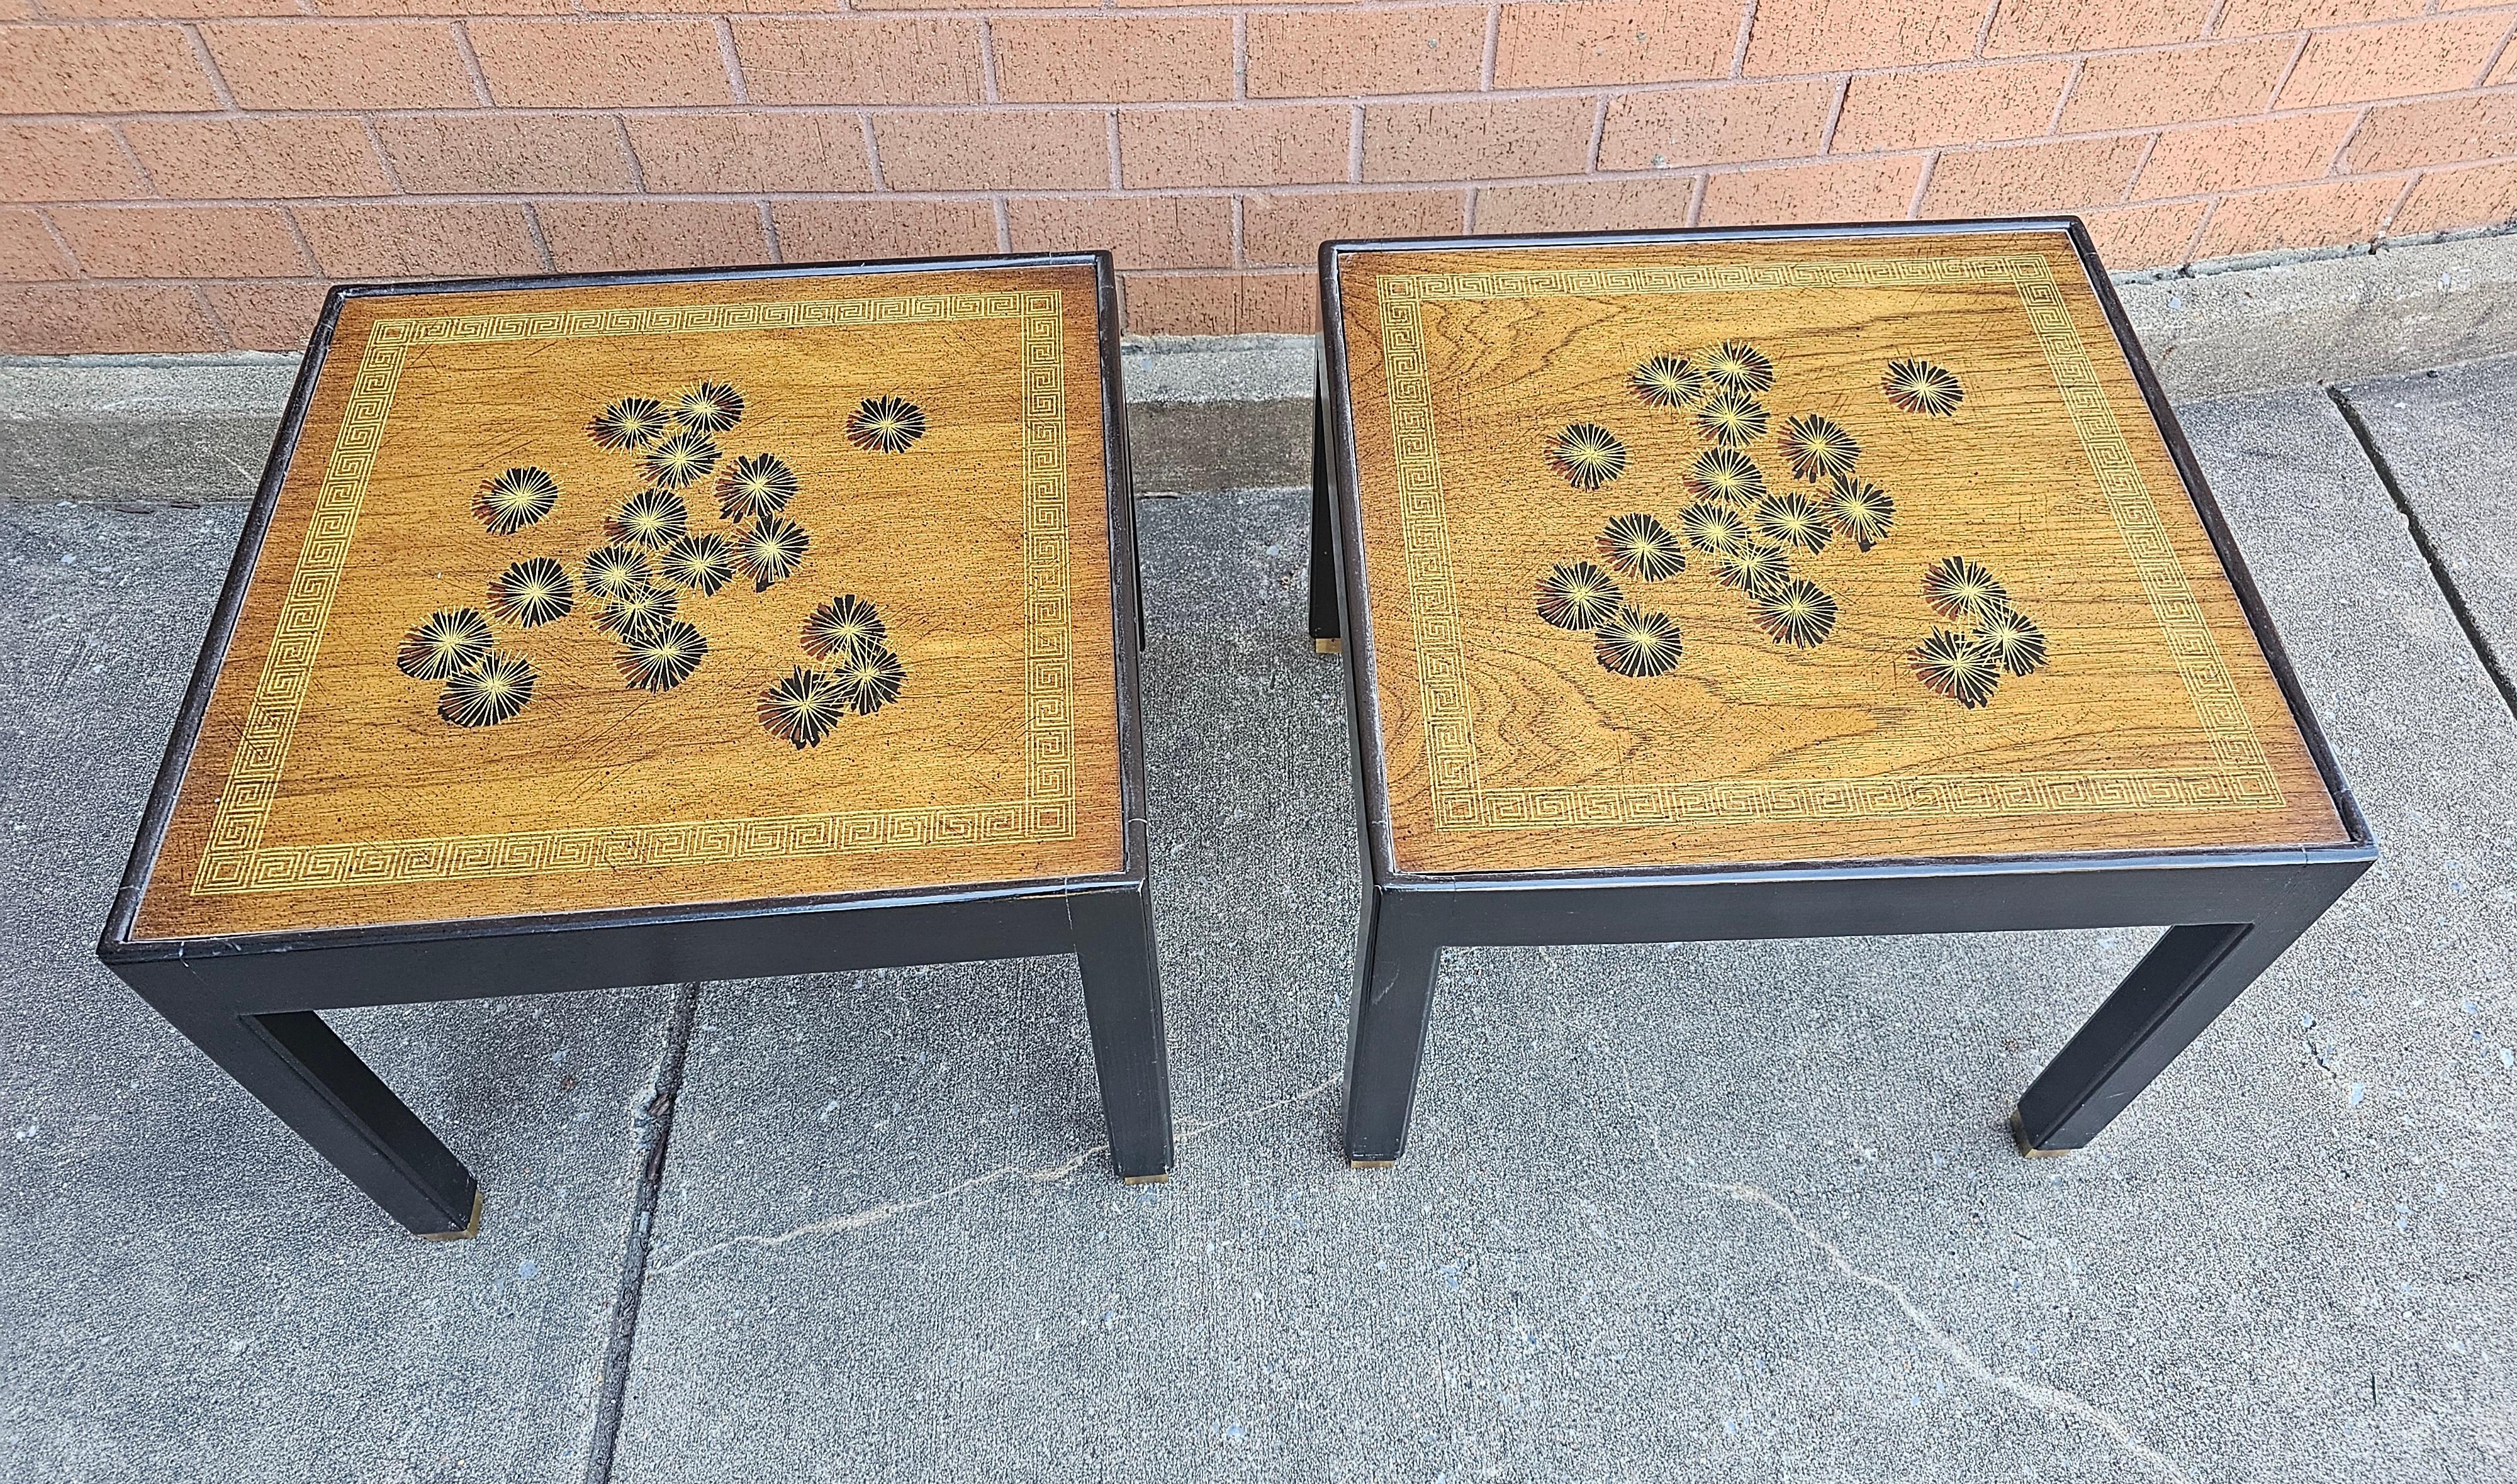 Pair Of Brandt Mid-Century Modern Partial Ebonized And Decorated Mahogany Side Tables with brass capped legs. Measure 21